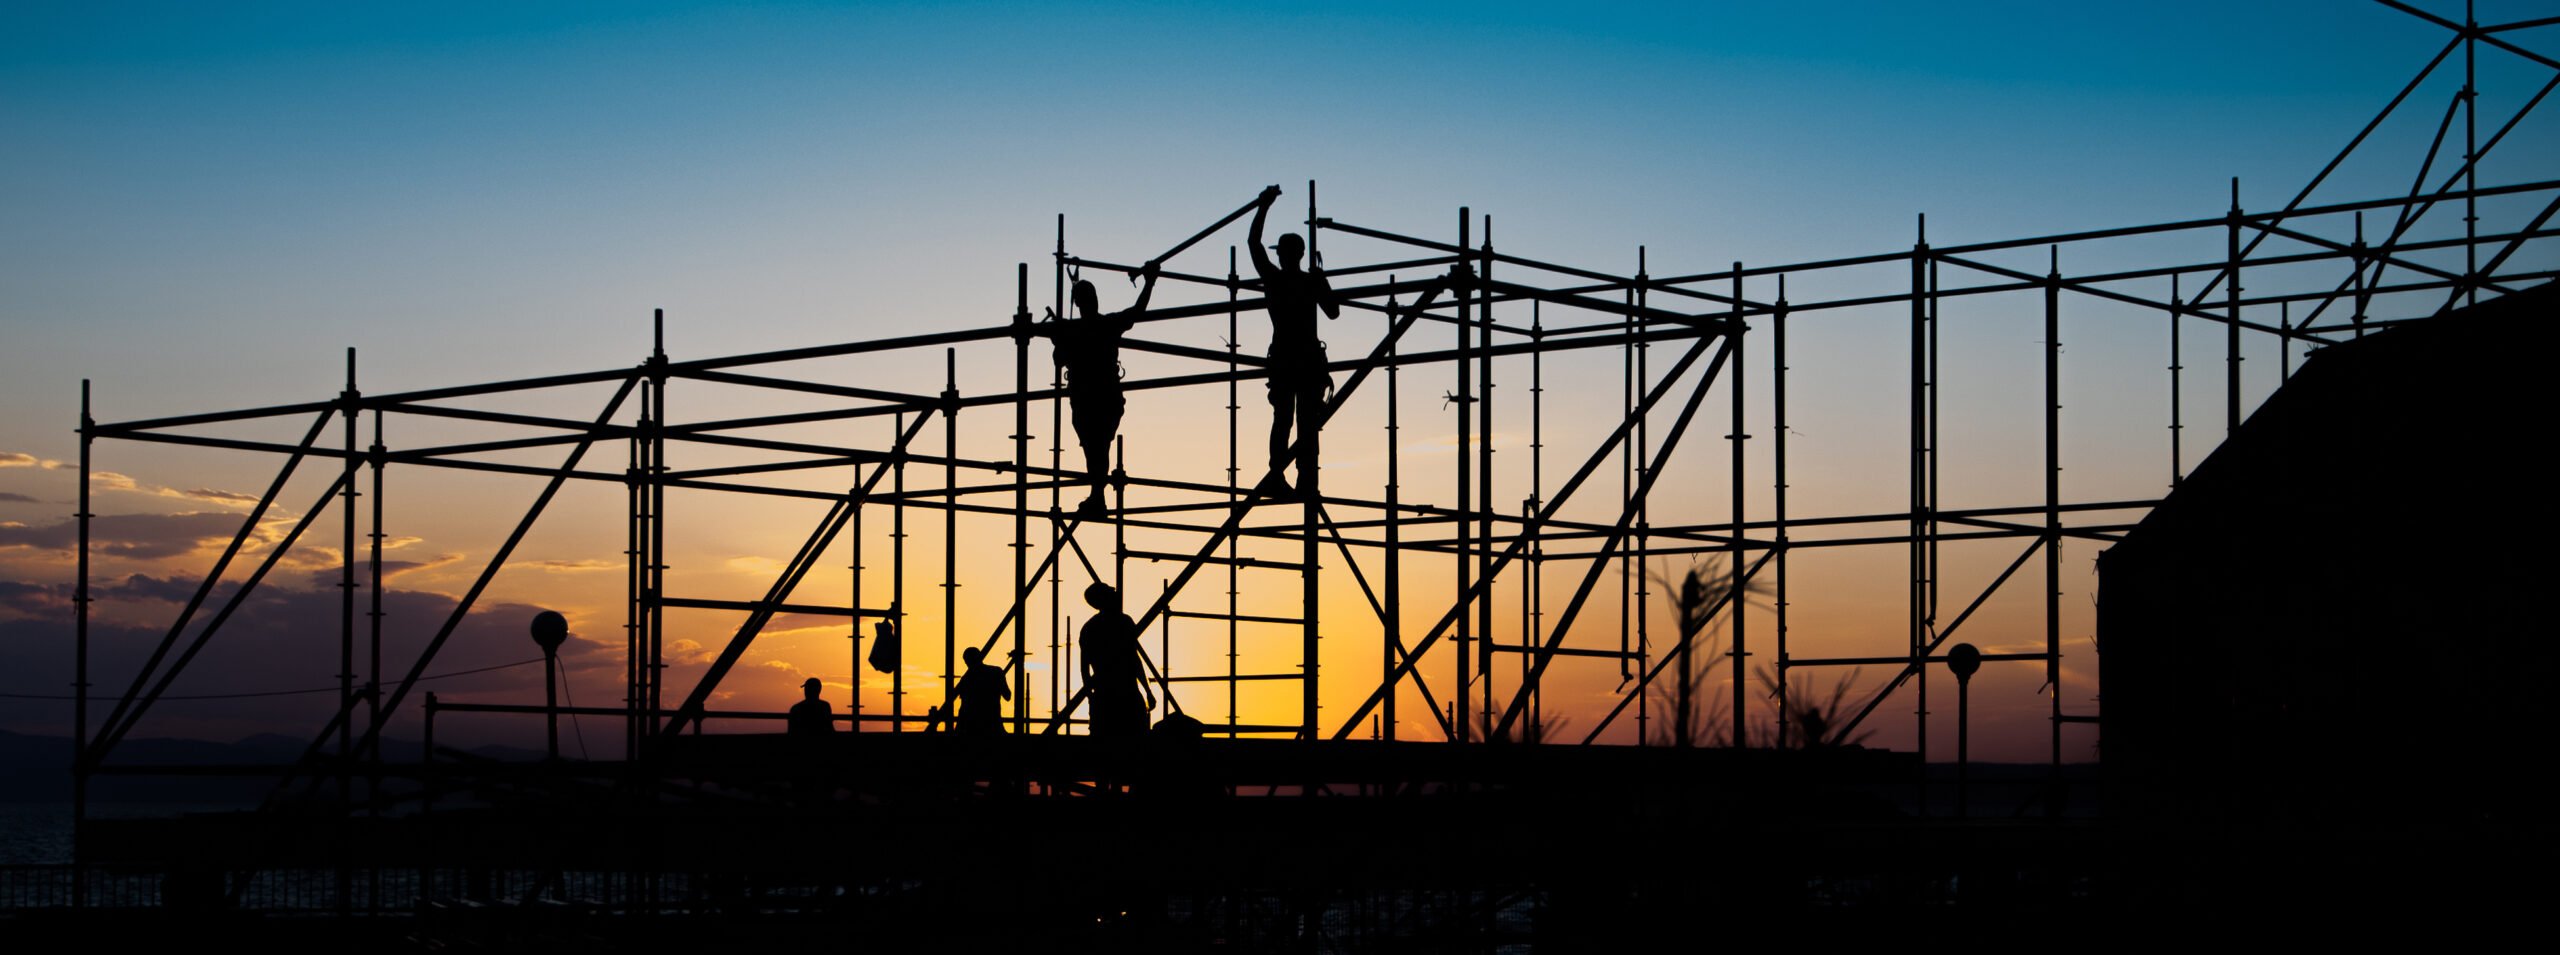 Silhouettes of workers building scaffolding at sunset